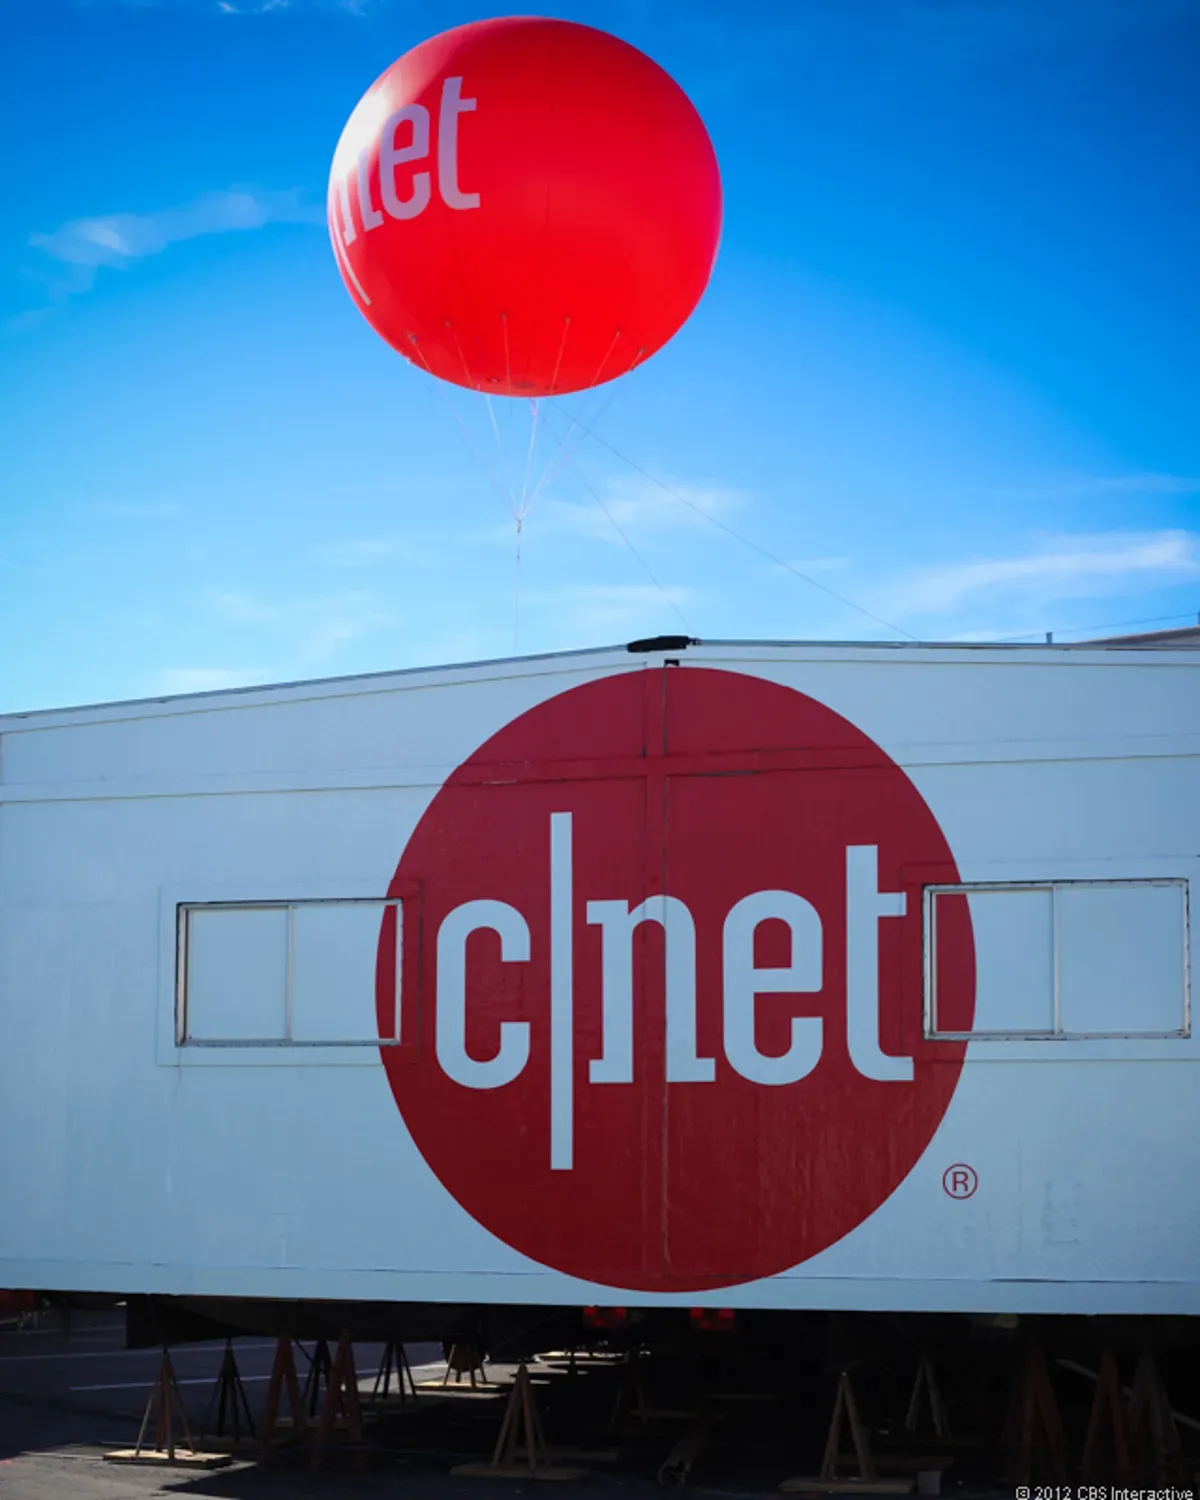 What happened to CNET?